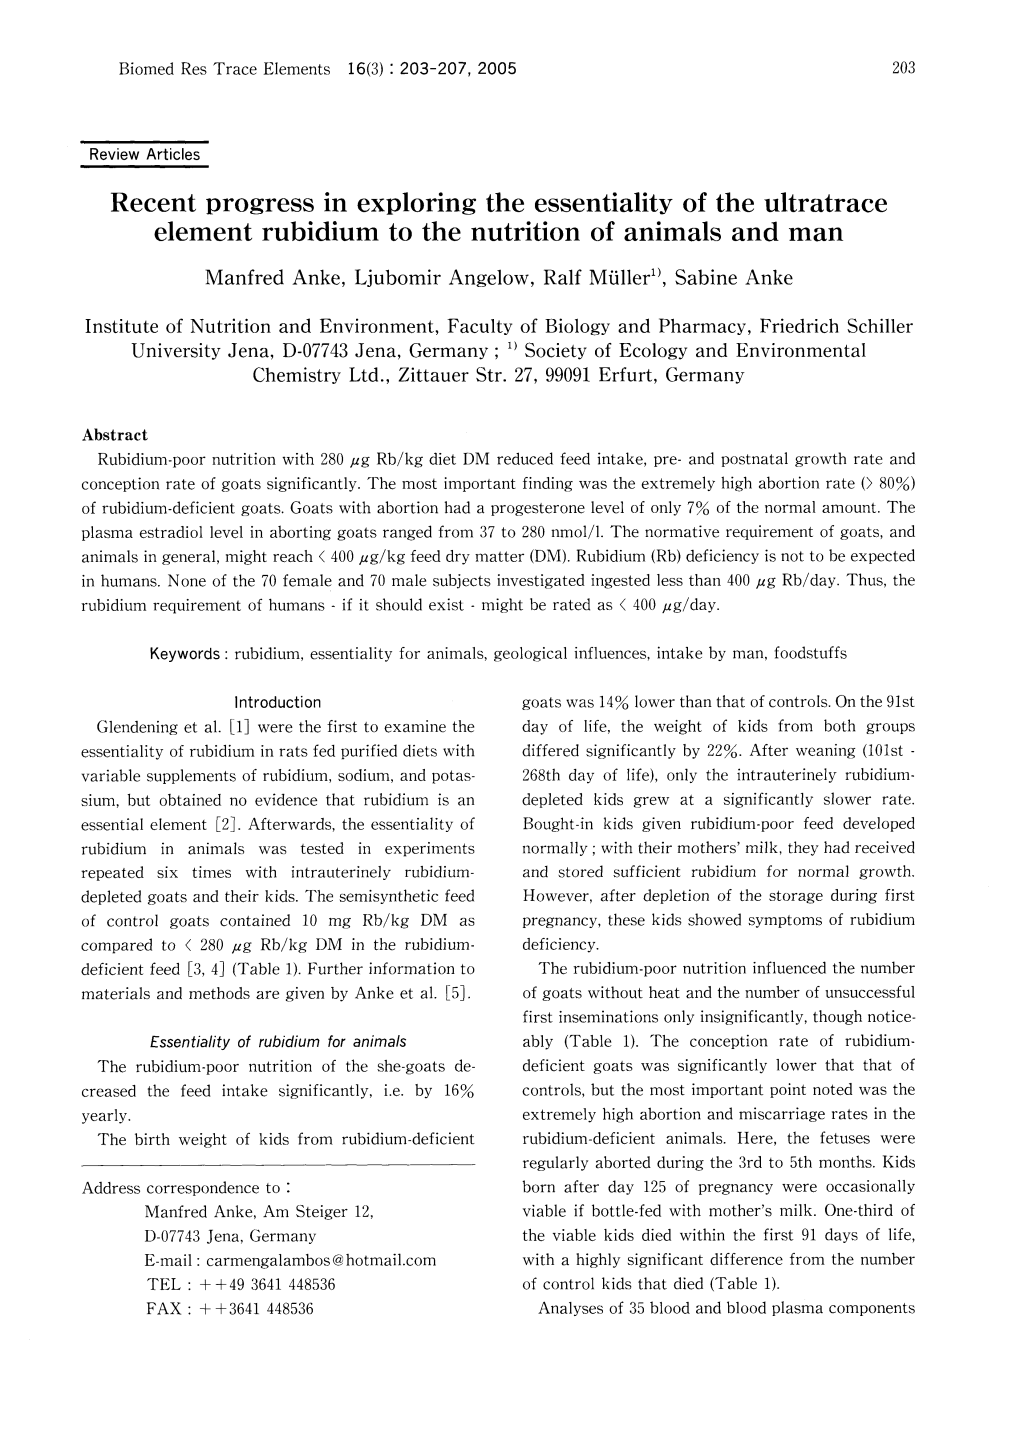 Element Rubidium to the Nutrition of Animals and Man